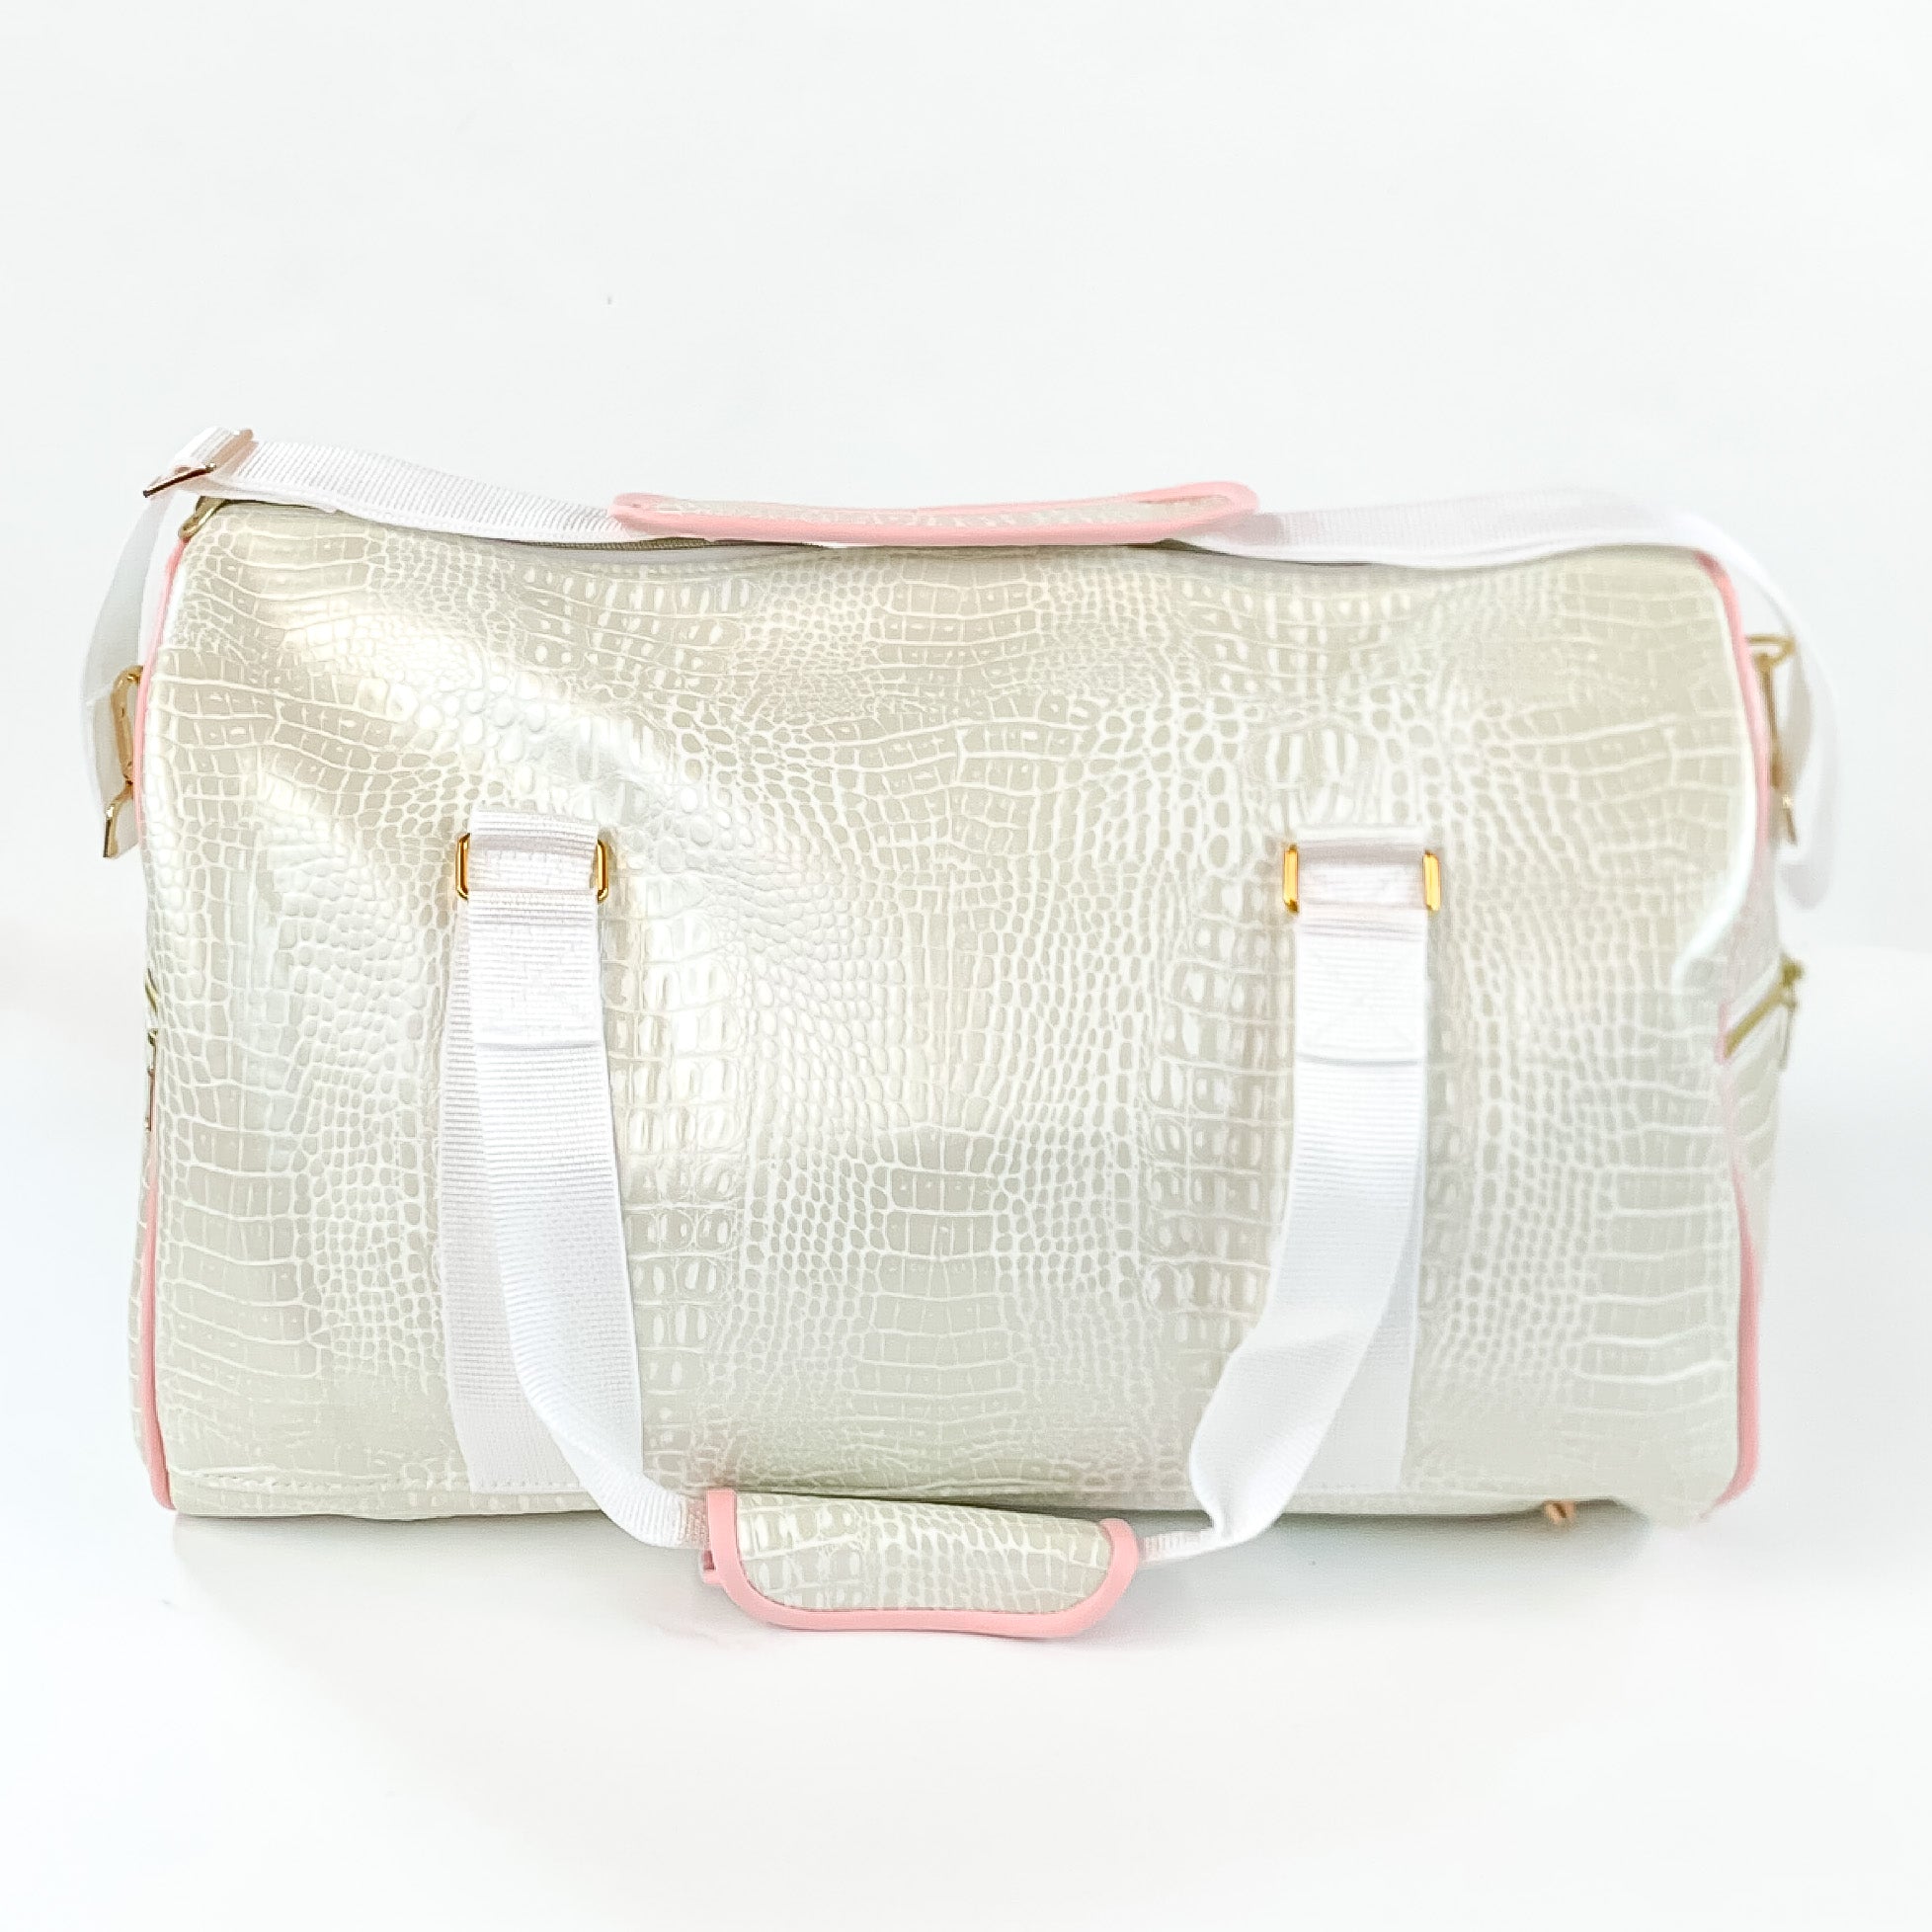 Makeup Junkie | Shade of Pearl Duffel Bag in Pearl White Croc Print - Giddy Up Glamour Boutique